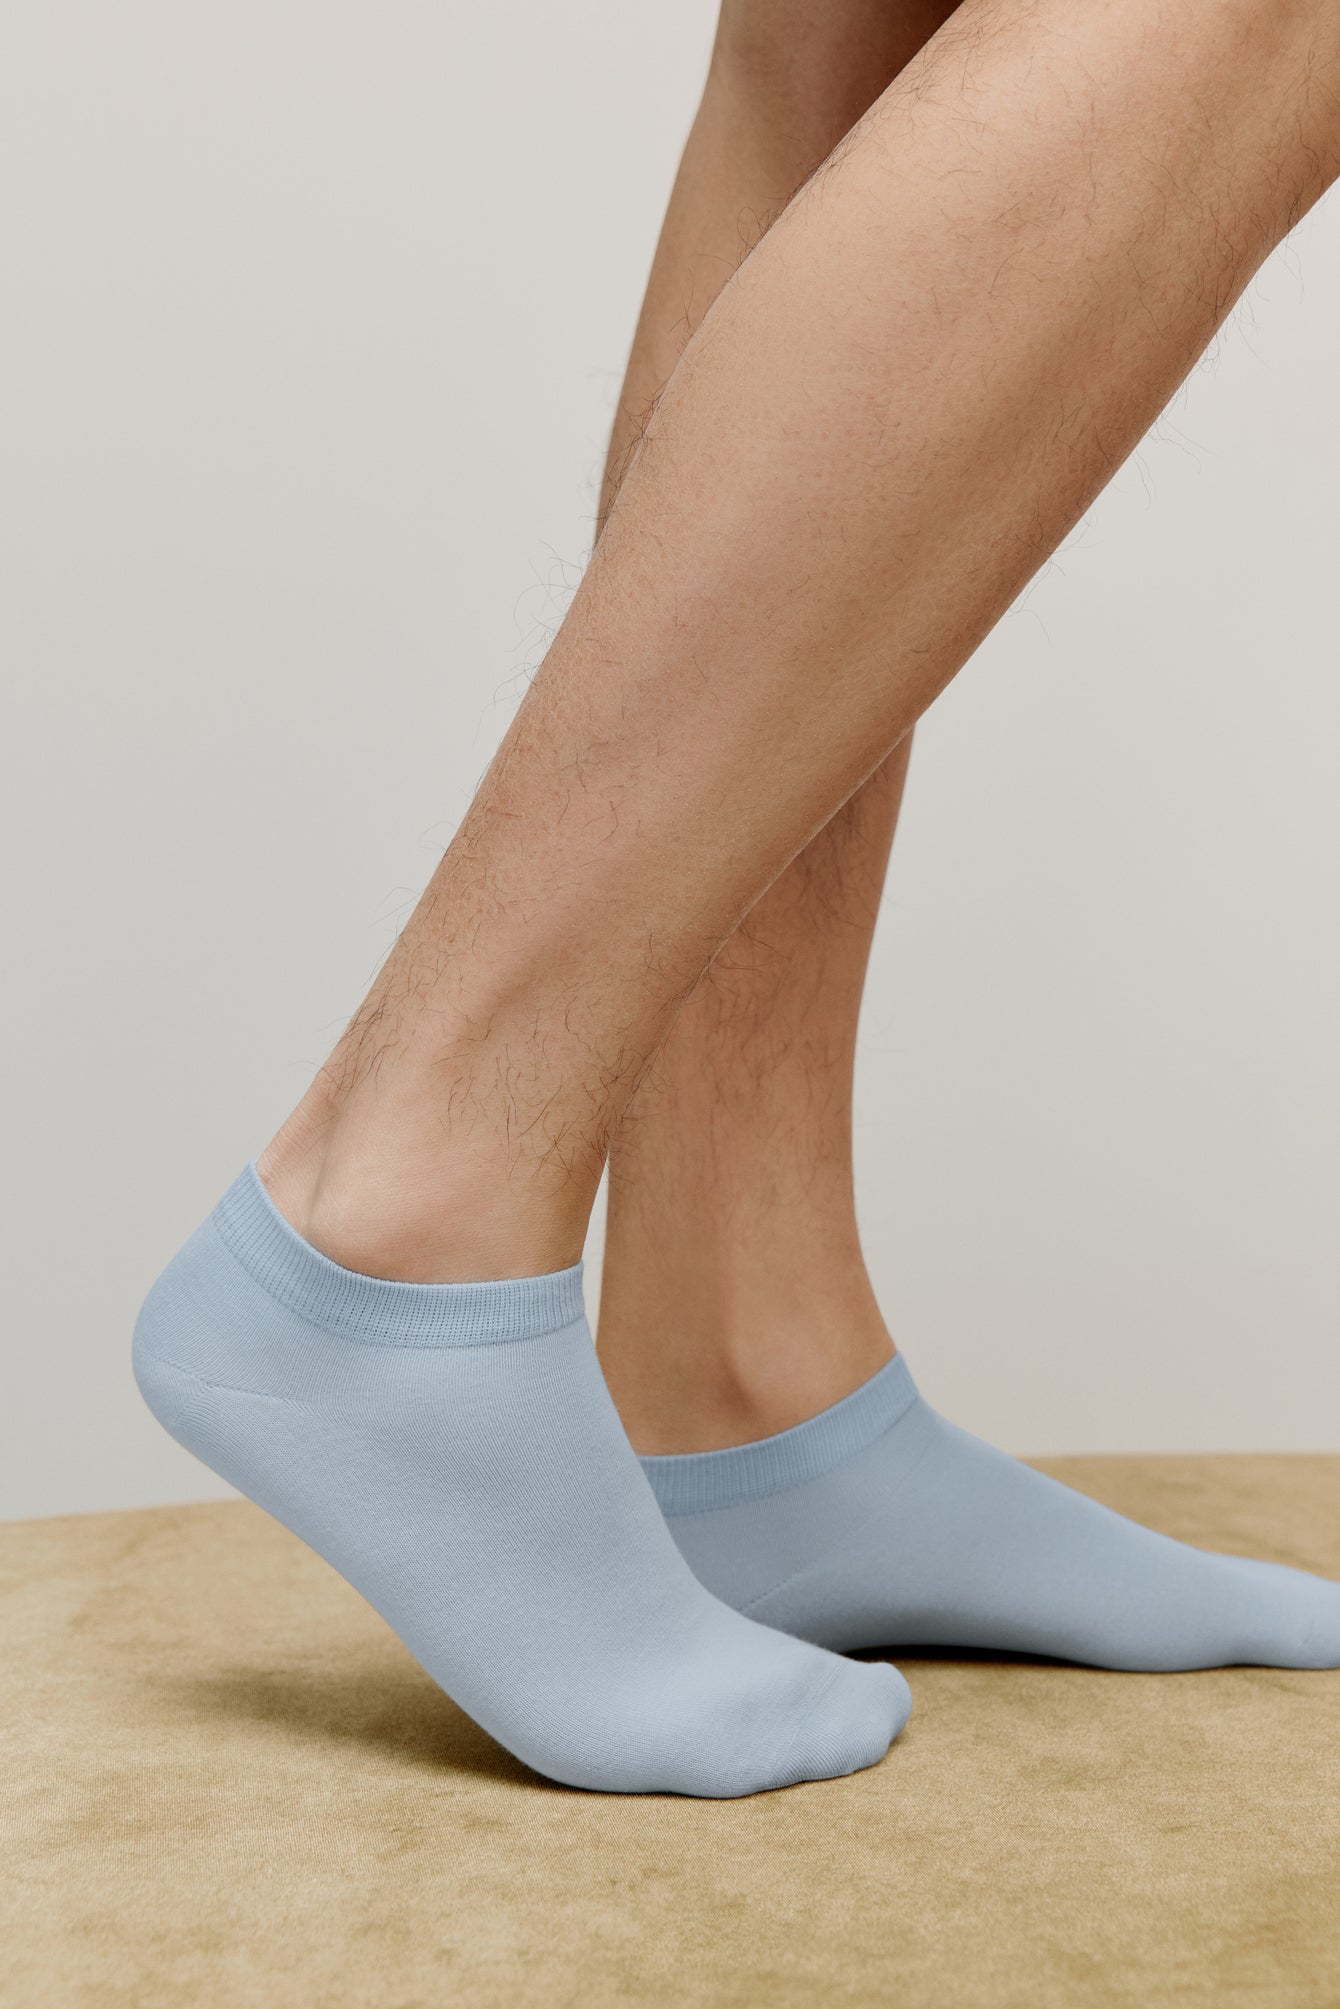 side view of a person wearing blue ankle socks